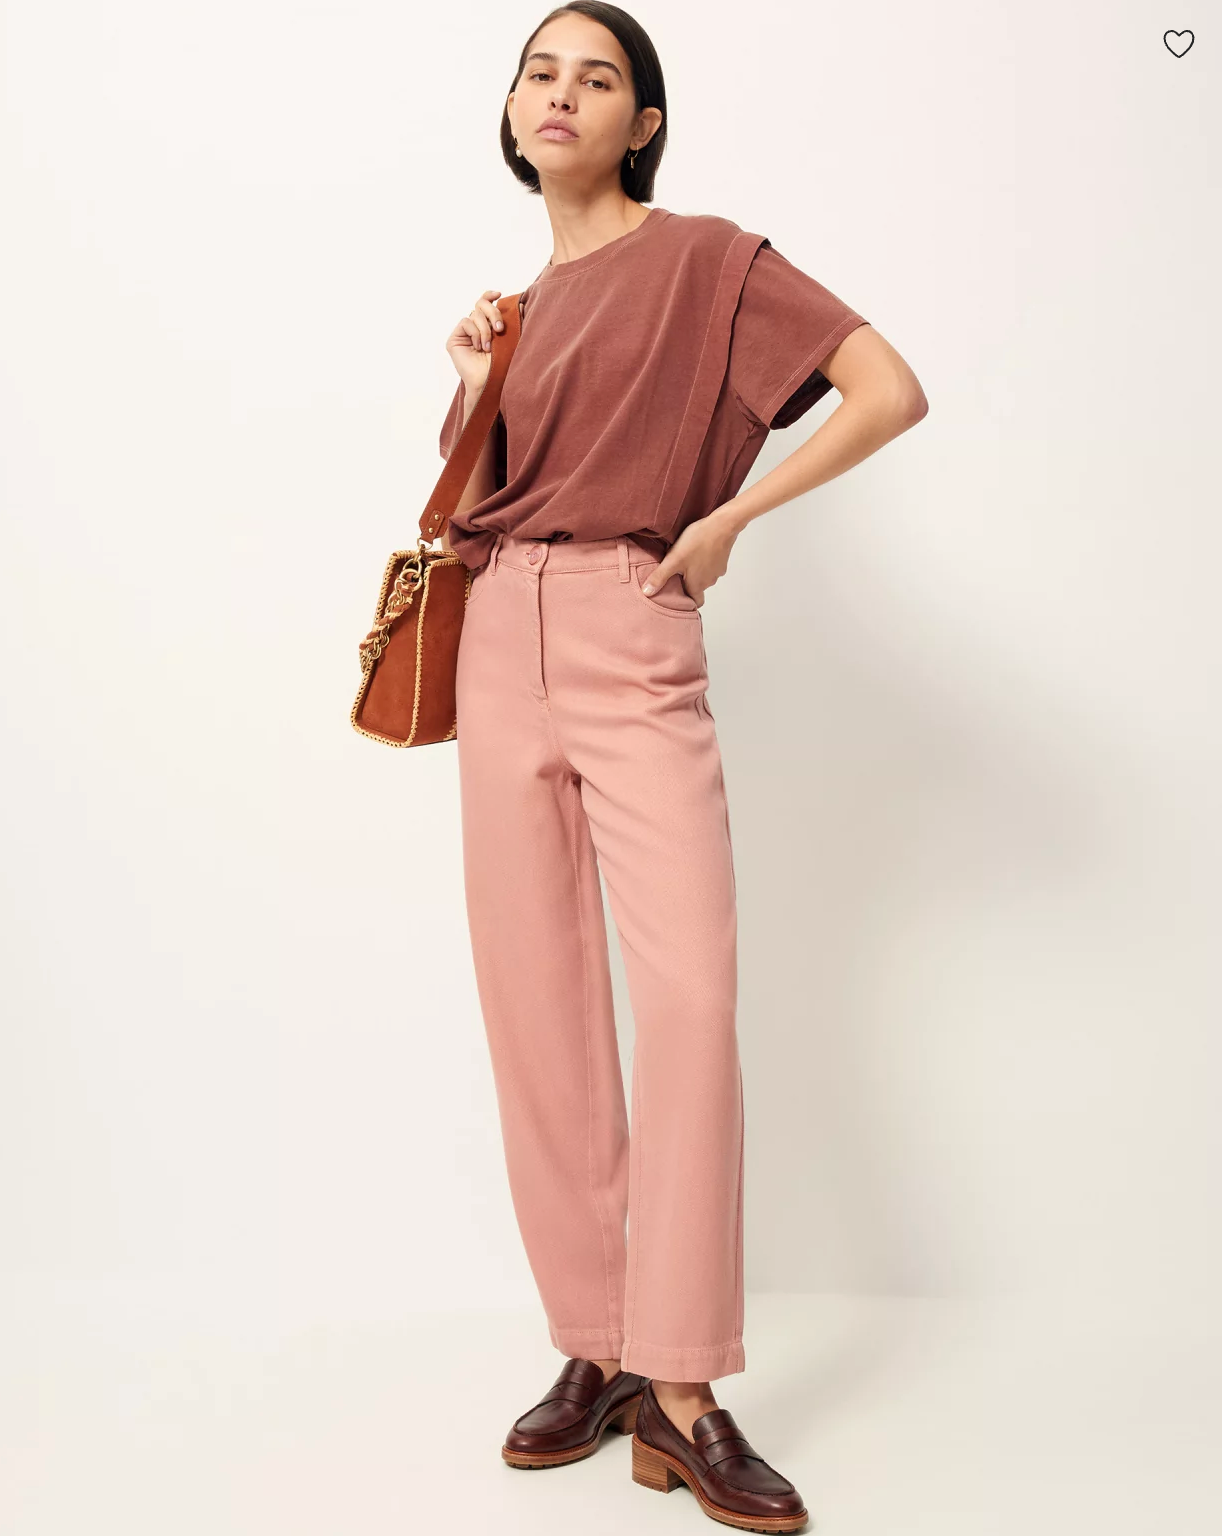 Woman wearing rose colored pants by Sessun and holding handbag